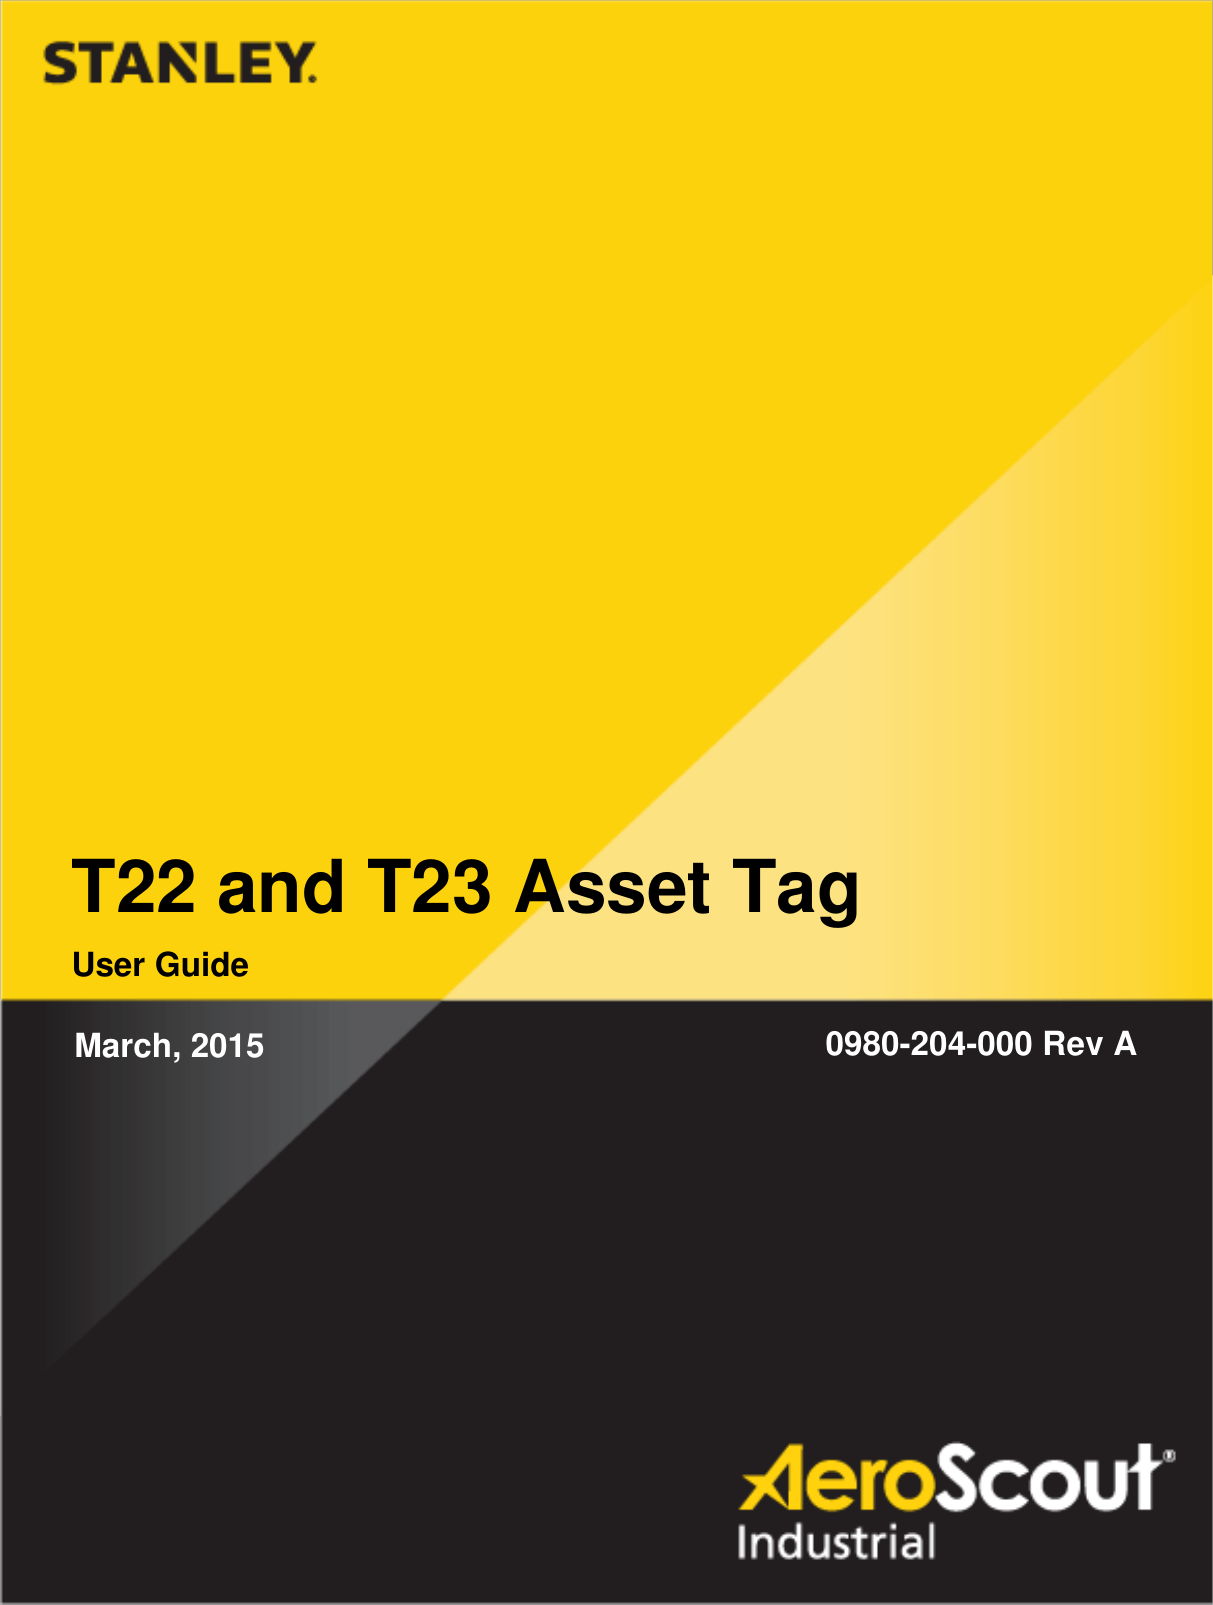 T22 Asset Tag User Guide      T22 and T23 Asset Tag User Guide 0980-204-000 Rev A March, 2015 